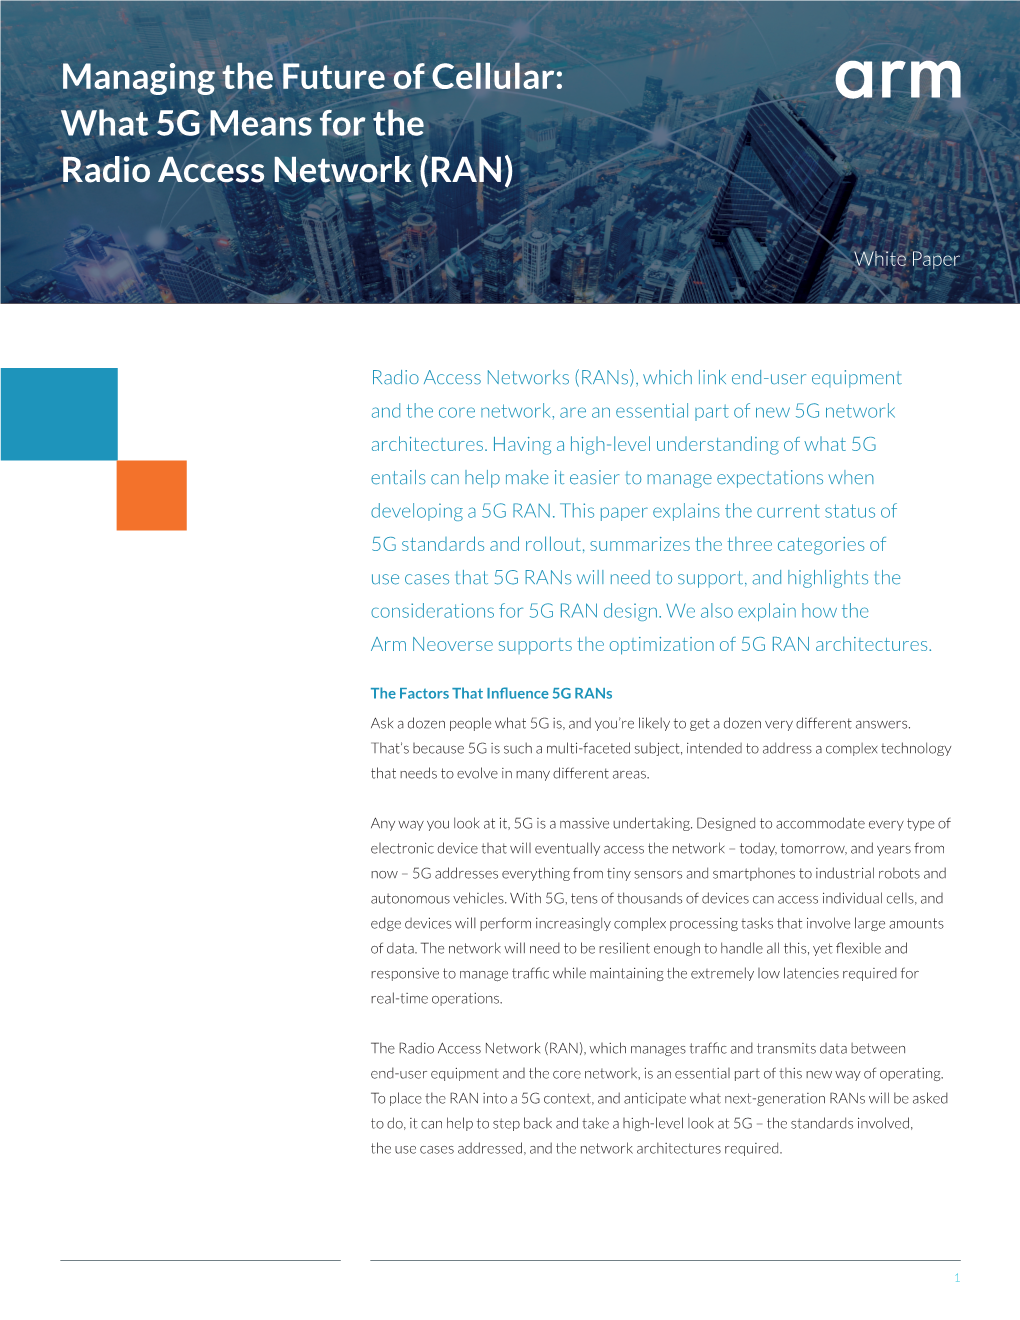 Managing the Future of Cellular: What 5G Means for the Radio Access Network (RAN)